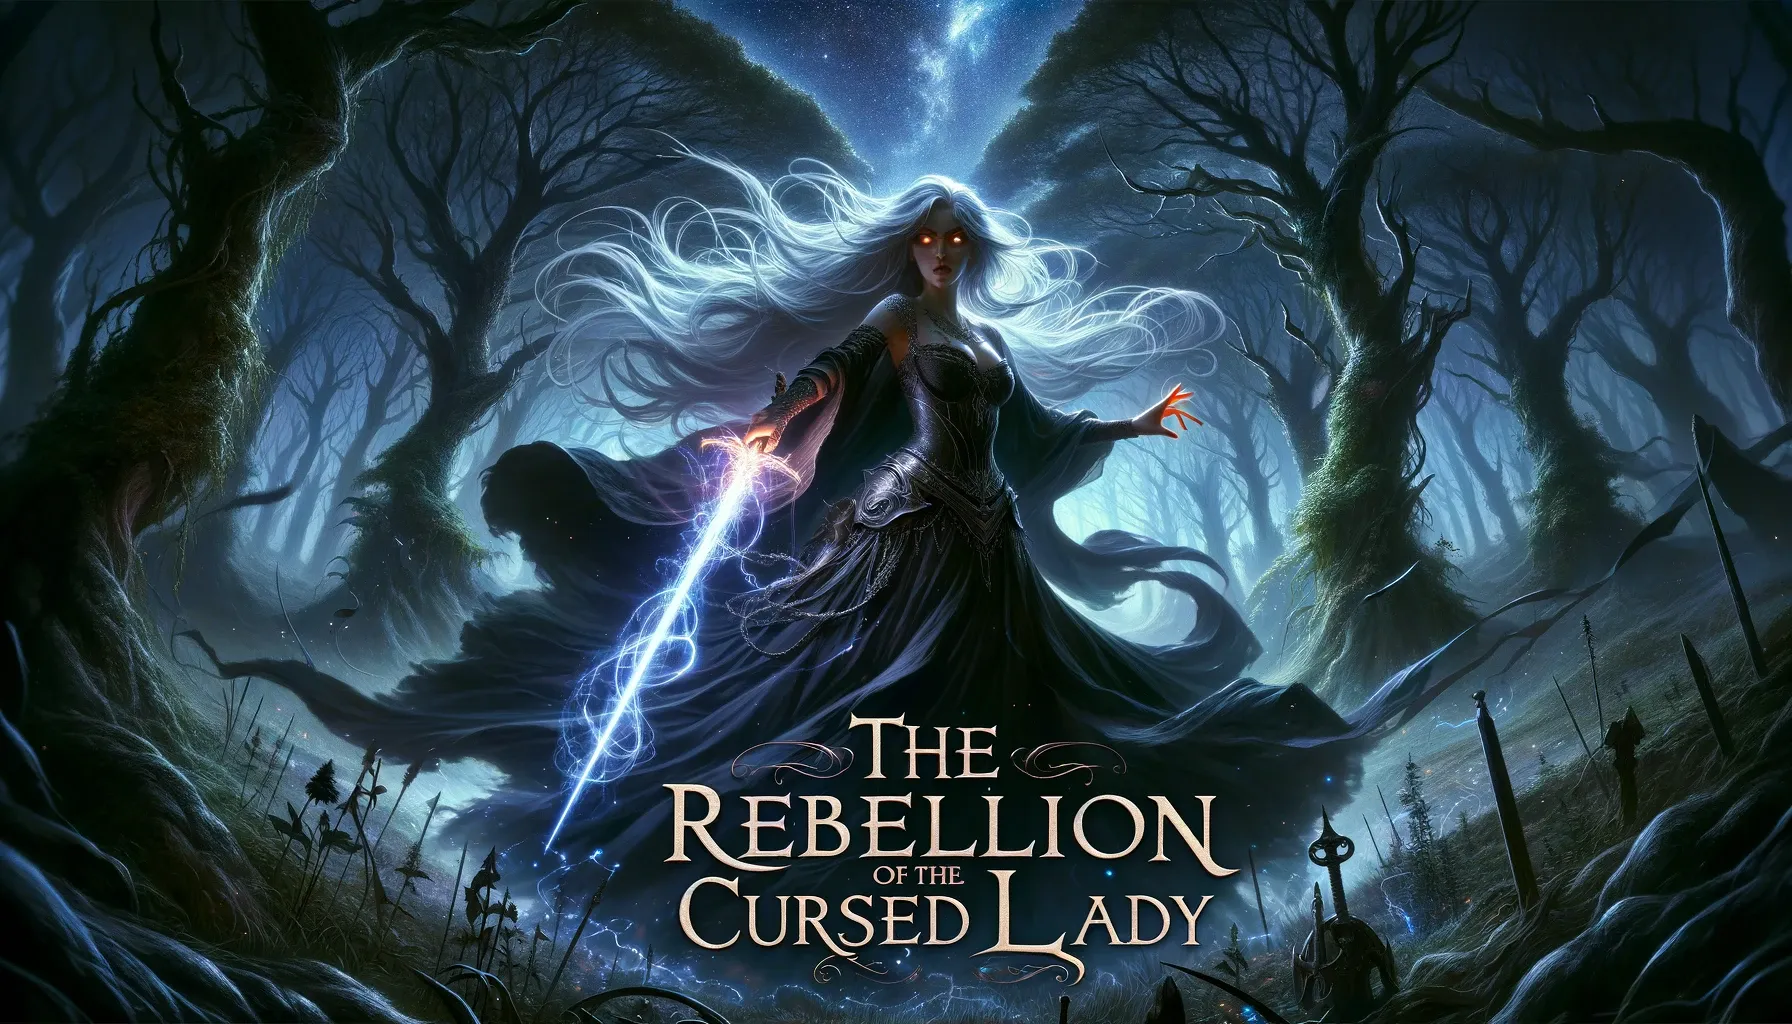 The Rebellion of the Cursed Lady Spoilers